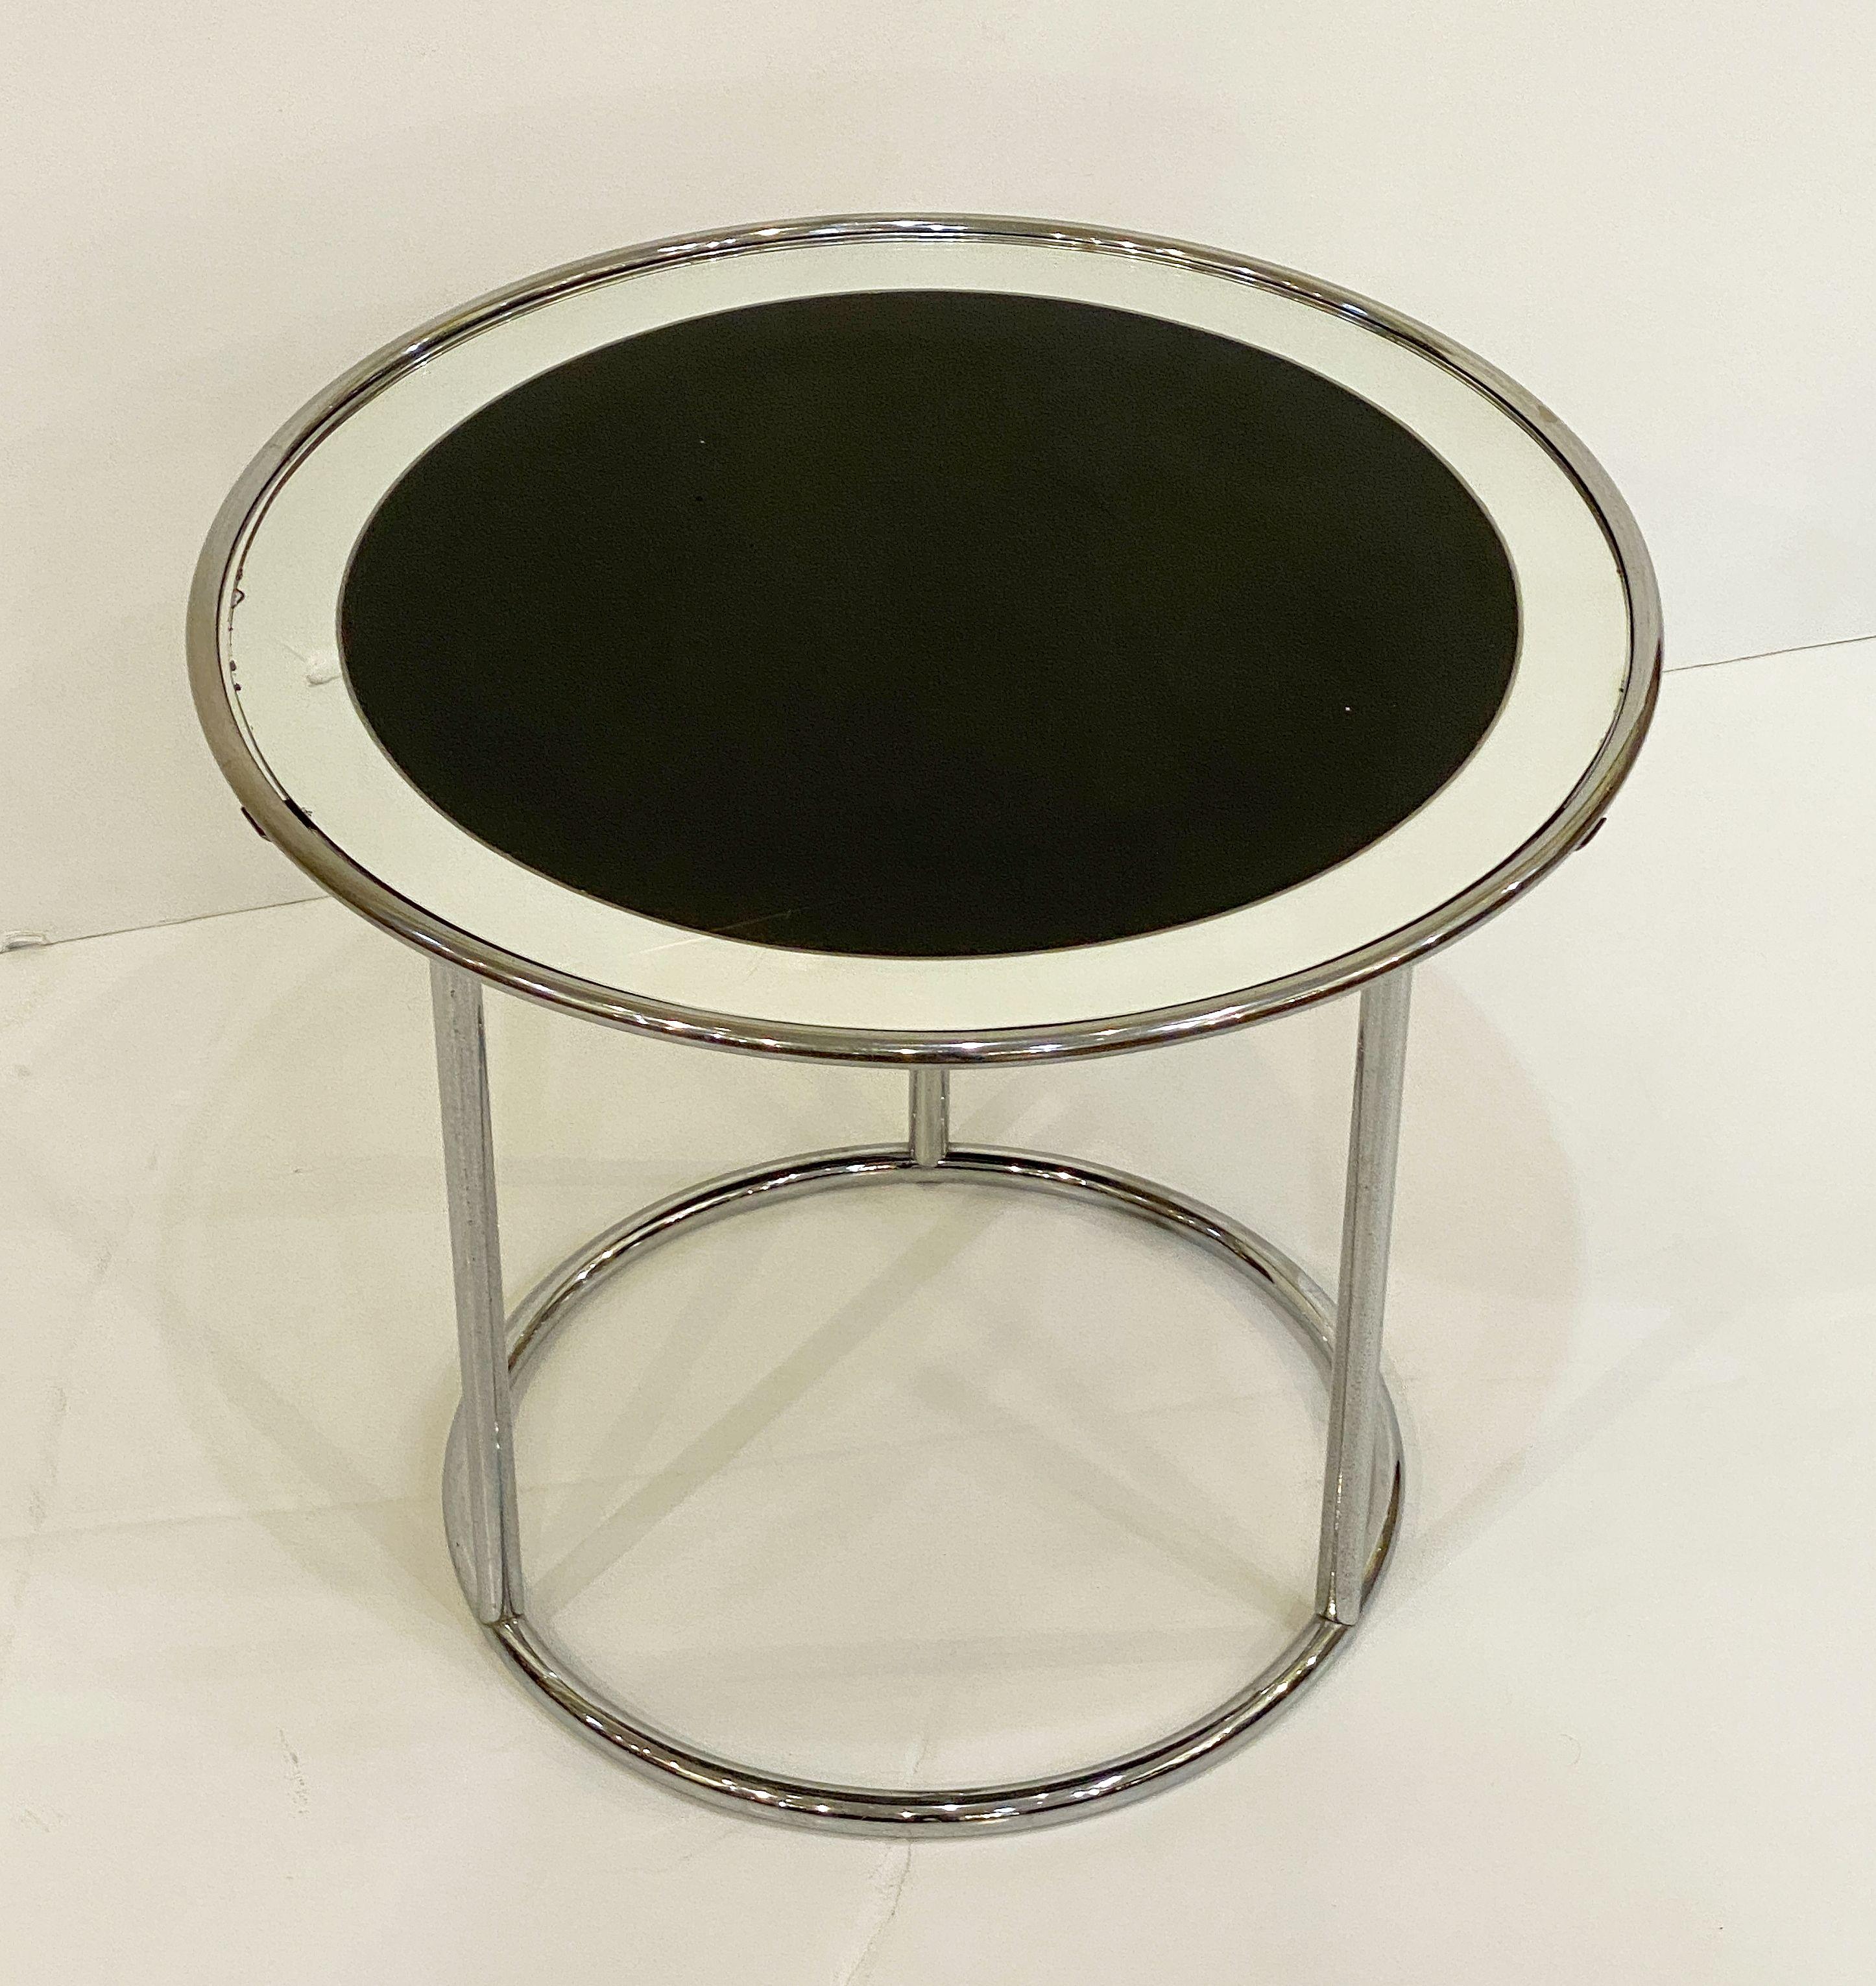 20th Century Art Deco Round Drinks Table of Chrome and Mirrored Glass from England For Sale